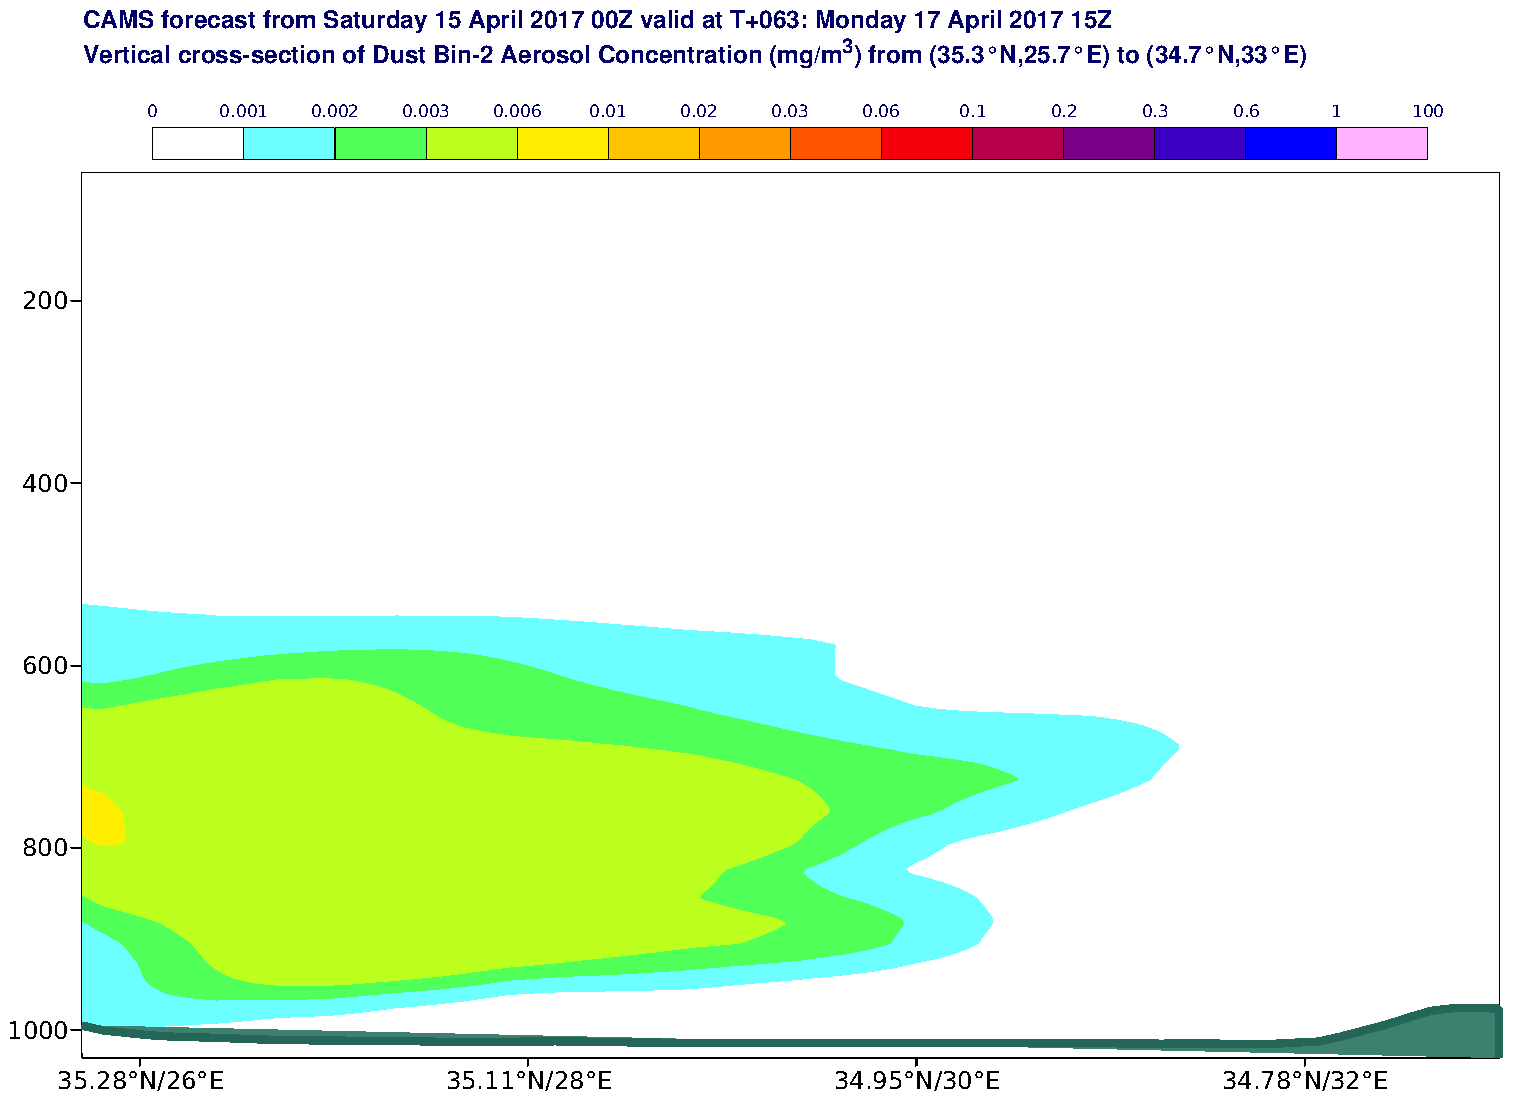 Vertical cross-section of Dust Bin-2 Aerosol Concentration (mg/m3) valid at T63 - 2017-04-17 15:00